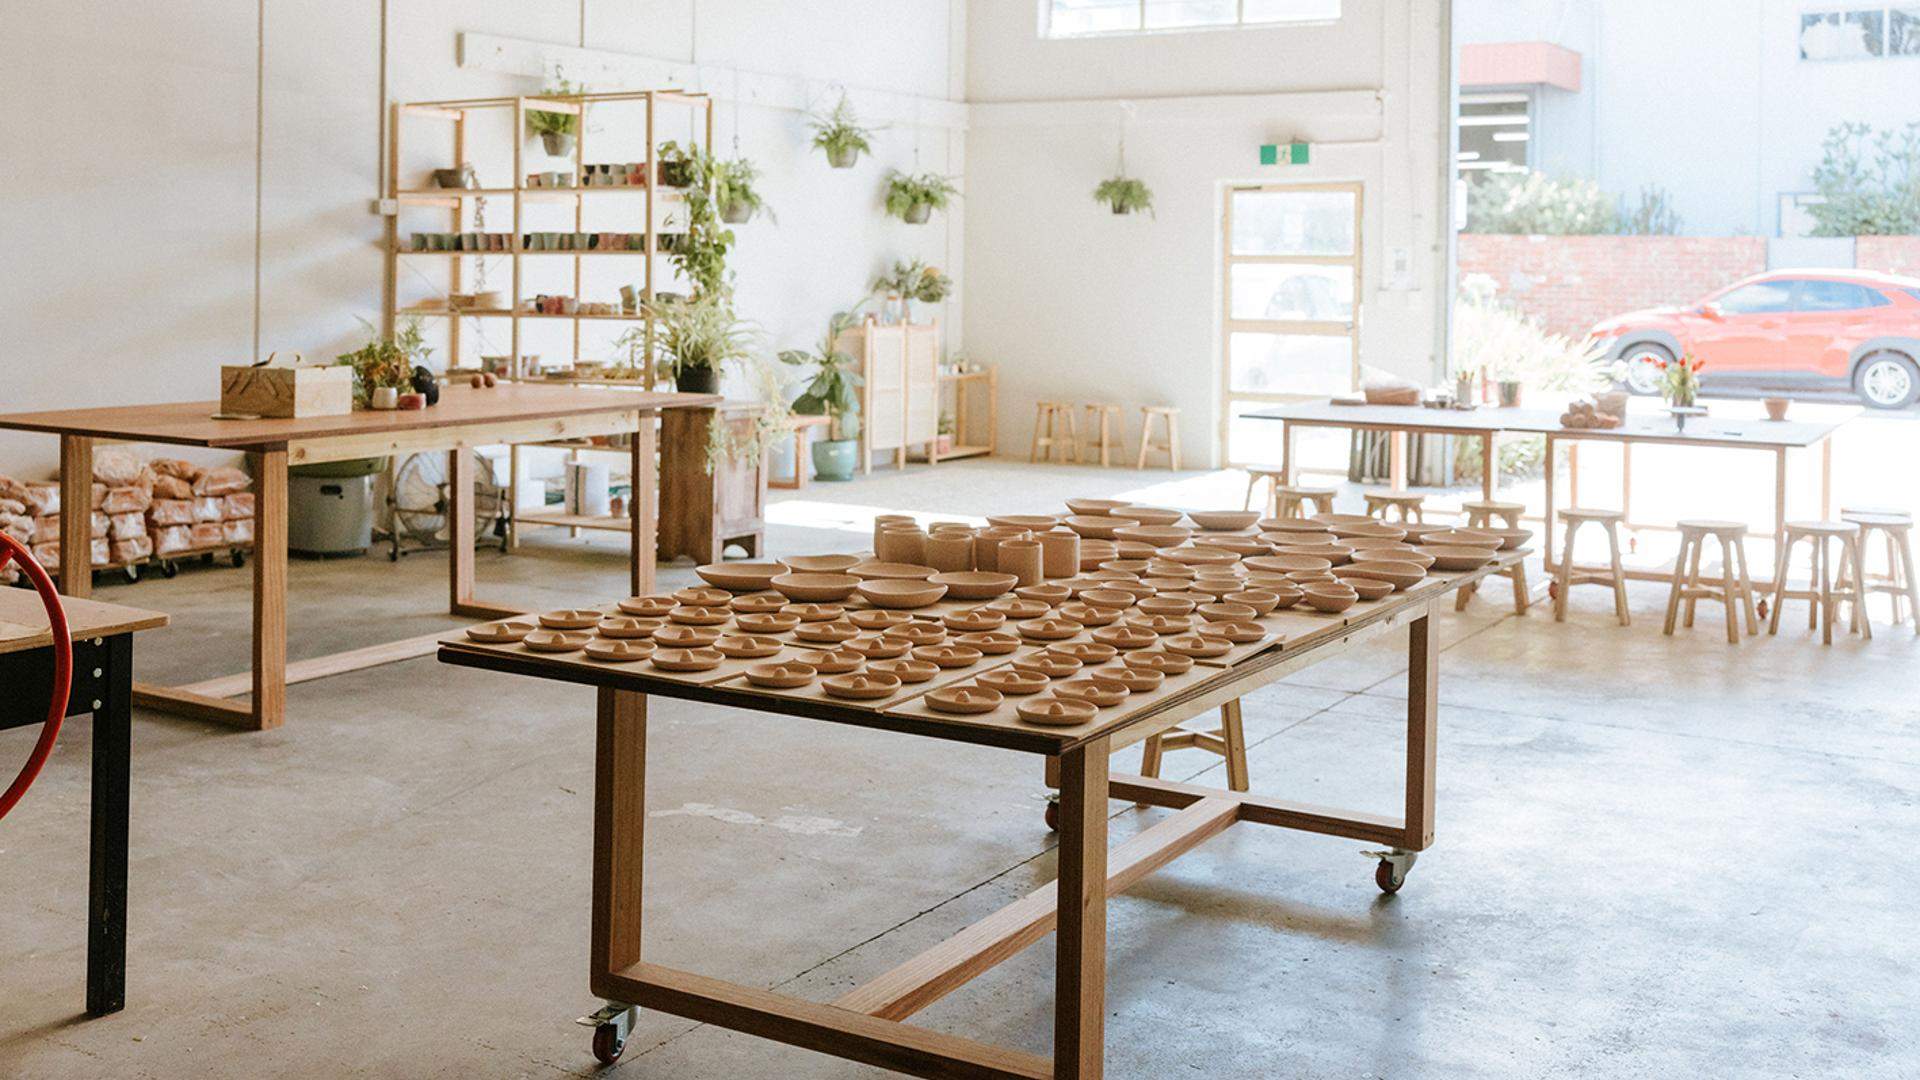 Clae Space Is the New Light-Filled Ceramics Studio Nestled in Melbourne's Leafy Northeast